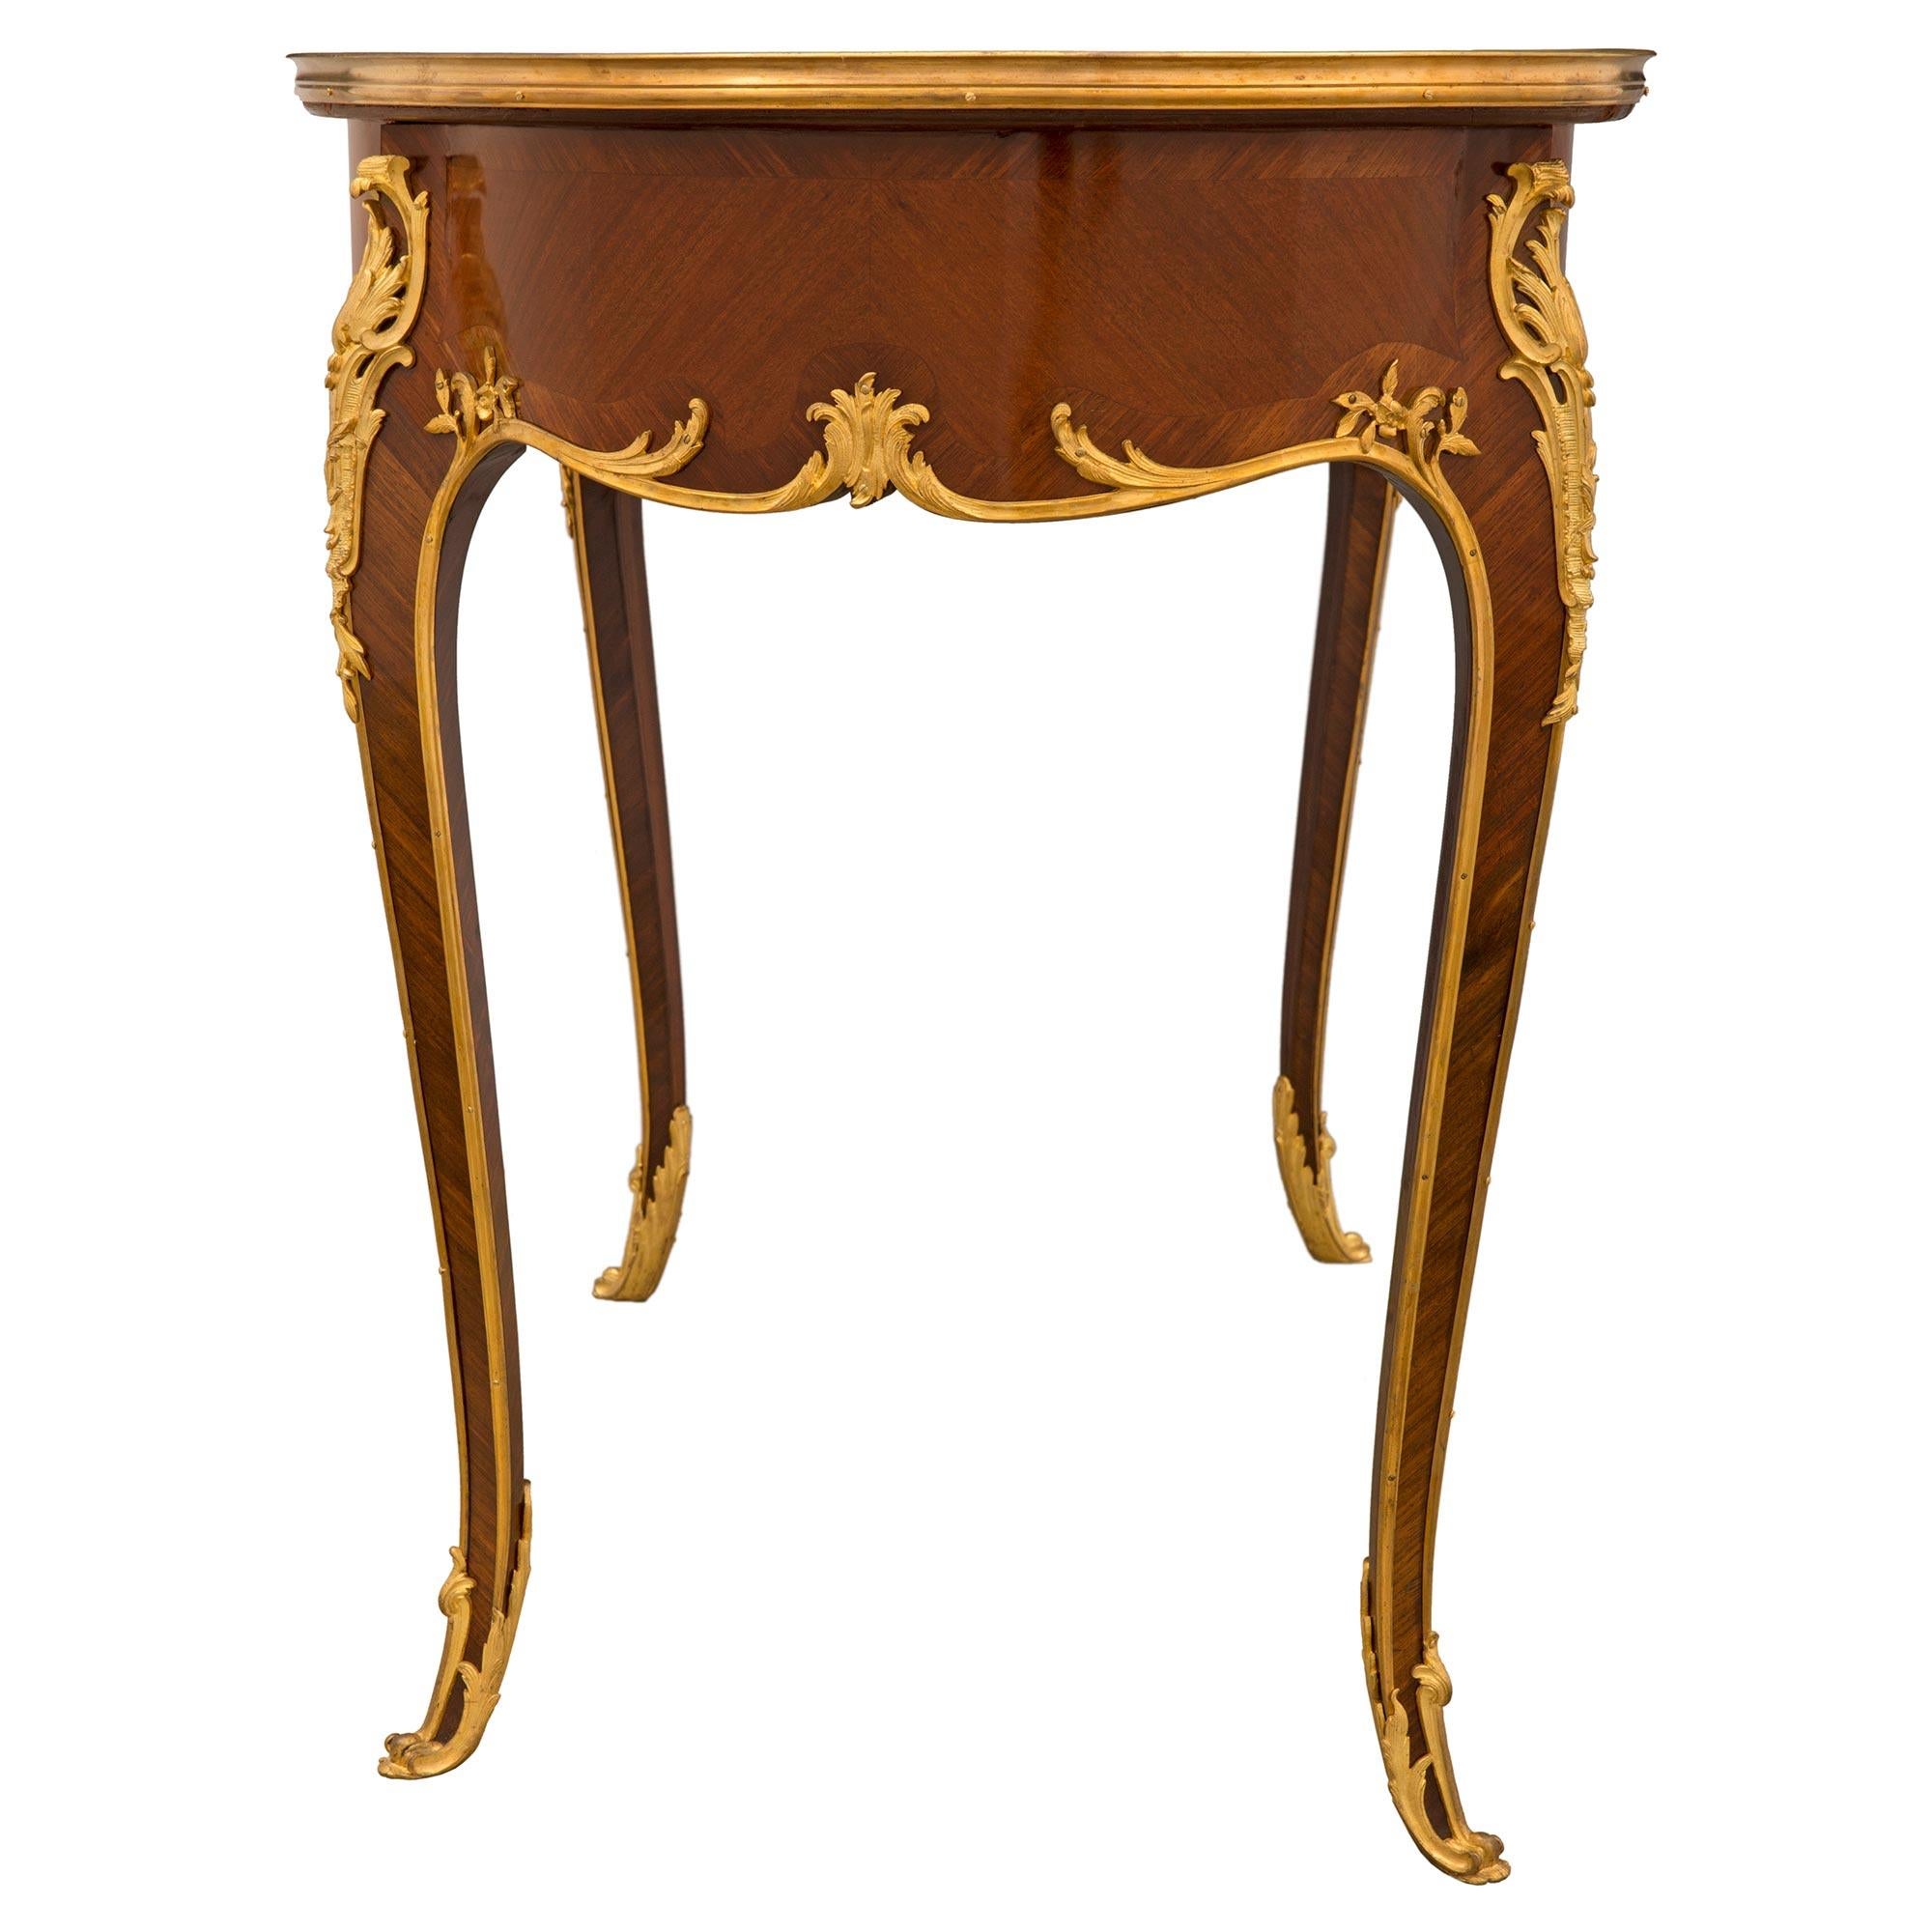 French 19th Century Louis XV Style Kingwood and Ormolu Desk, Attributed to Linke For Sale 2